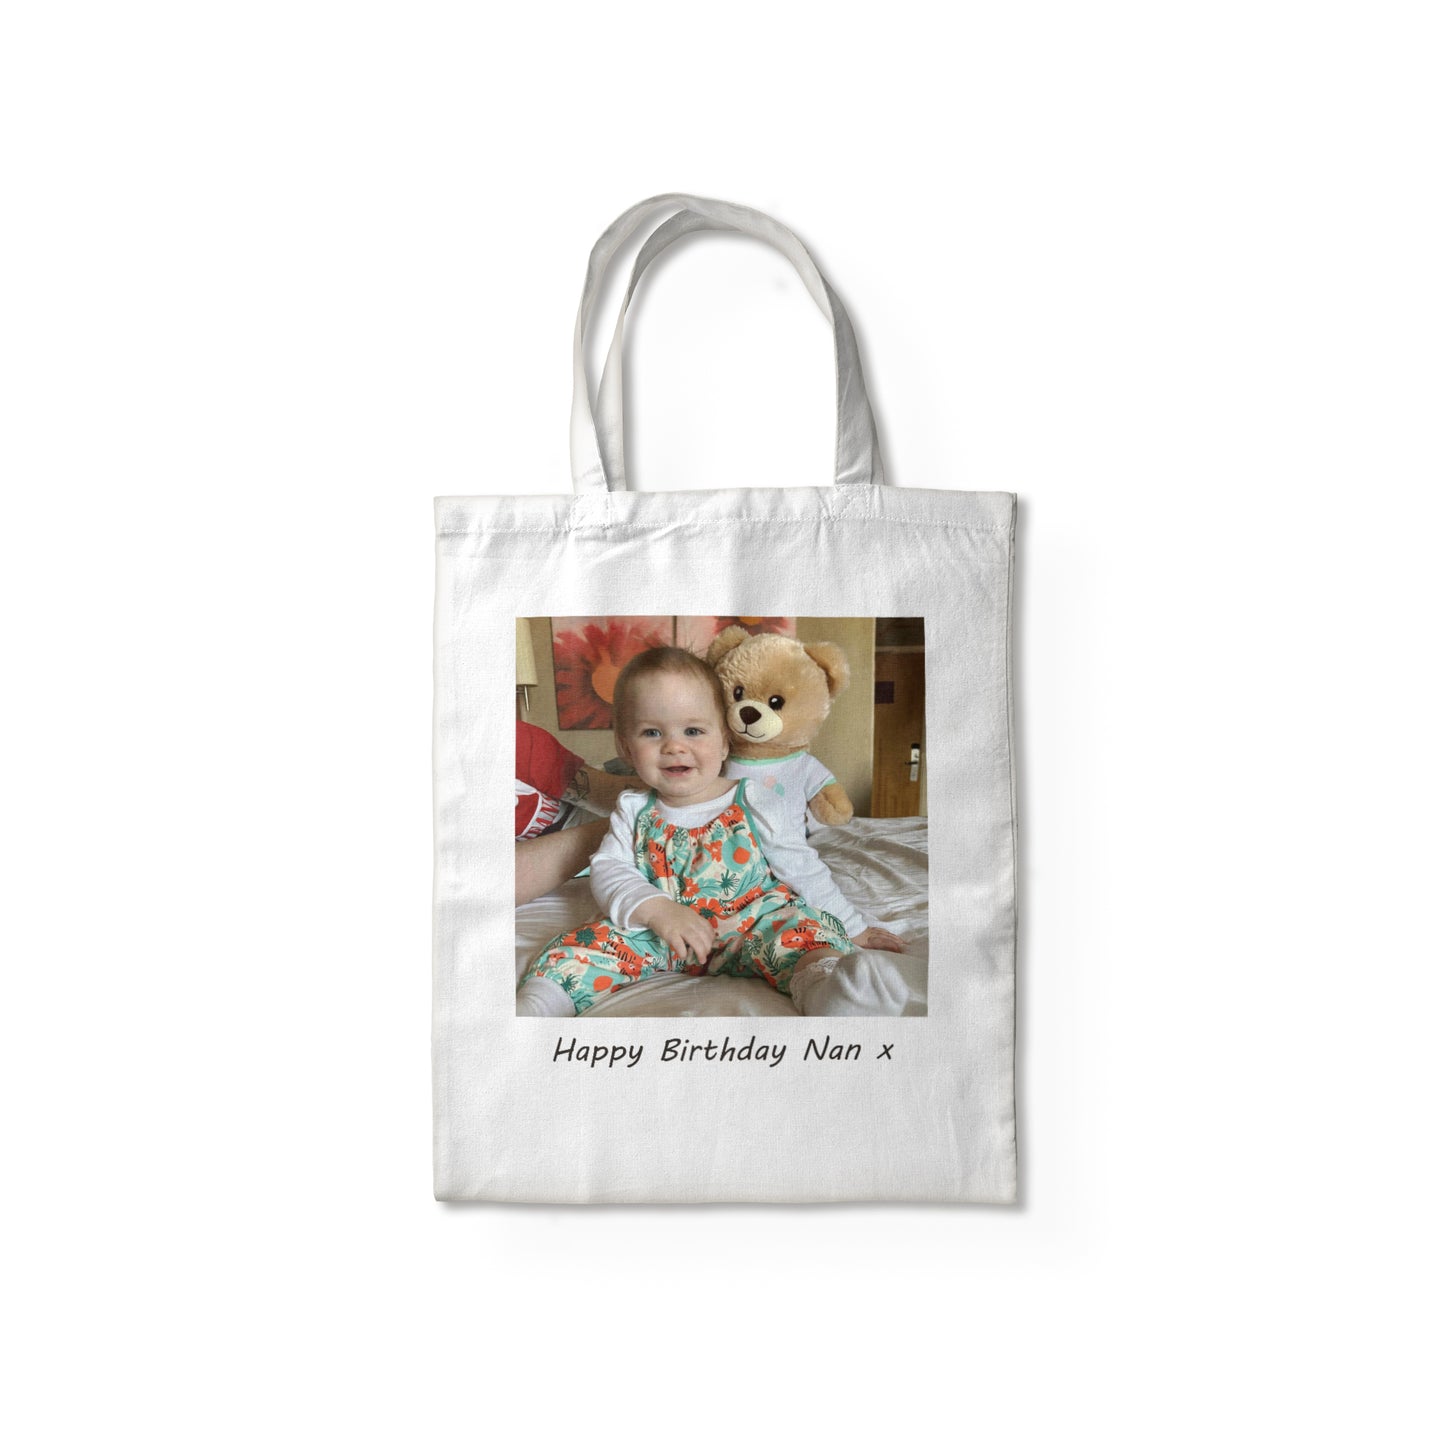 Custom Photo Tote Bag - Personalised Shopping Bag with Your Picture